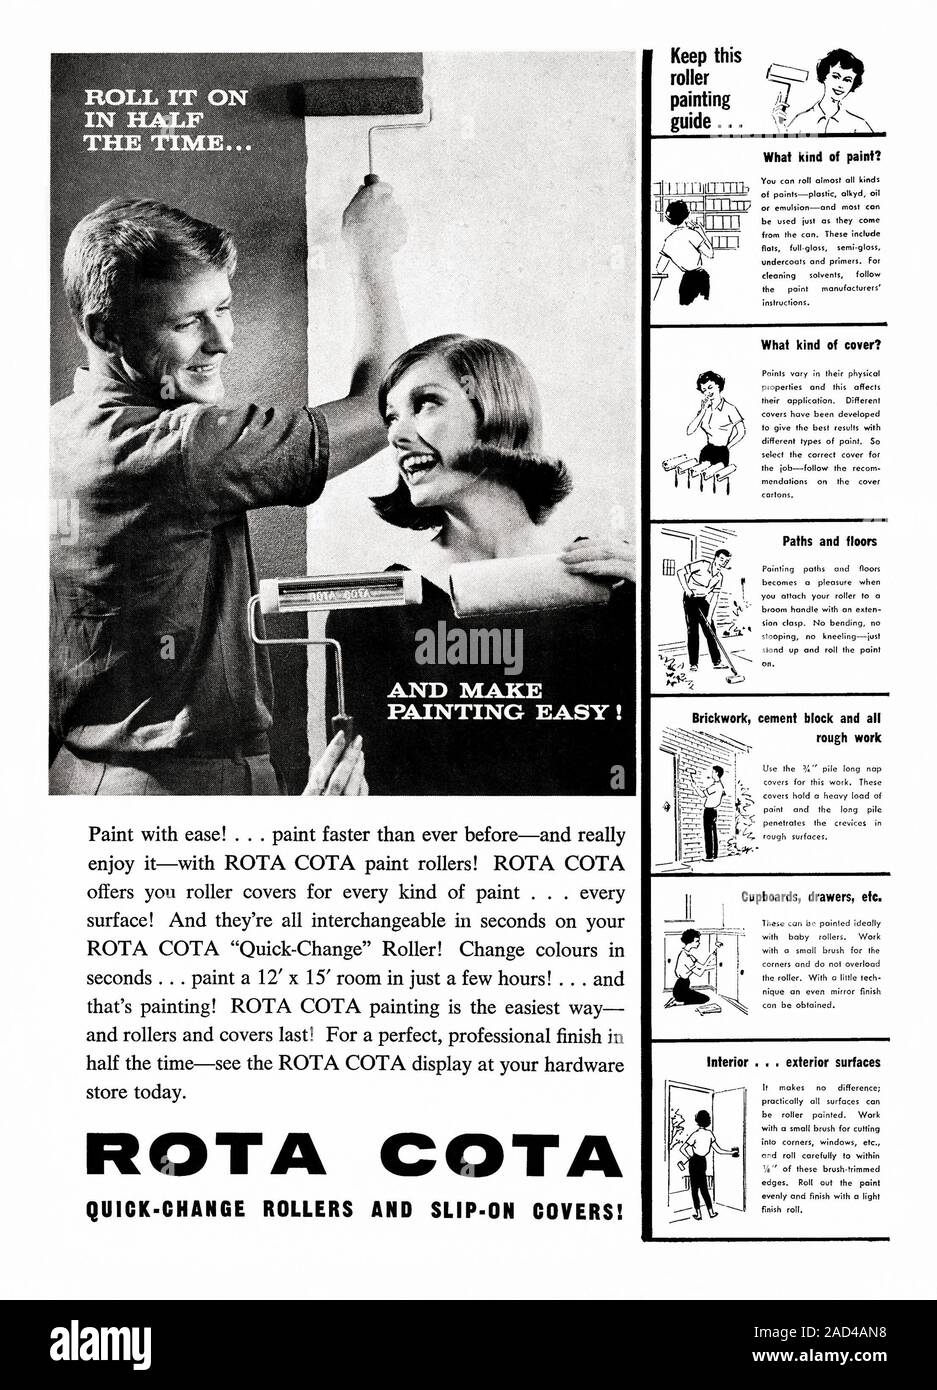 A 1960s advert for Rota Cota paint rollers - it appeared in an ...